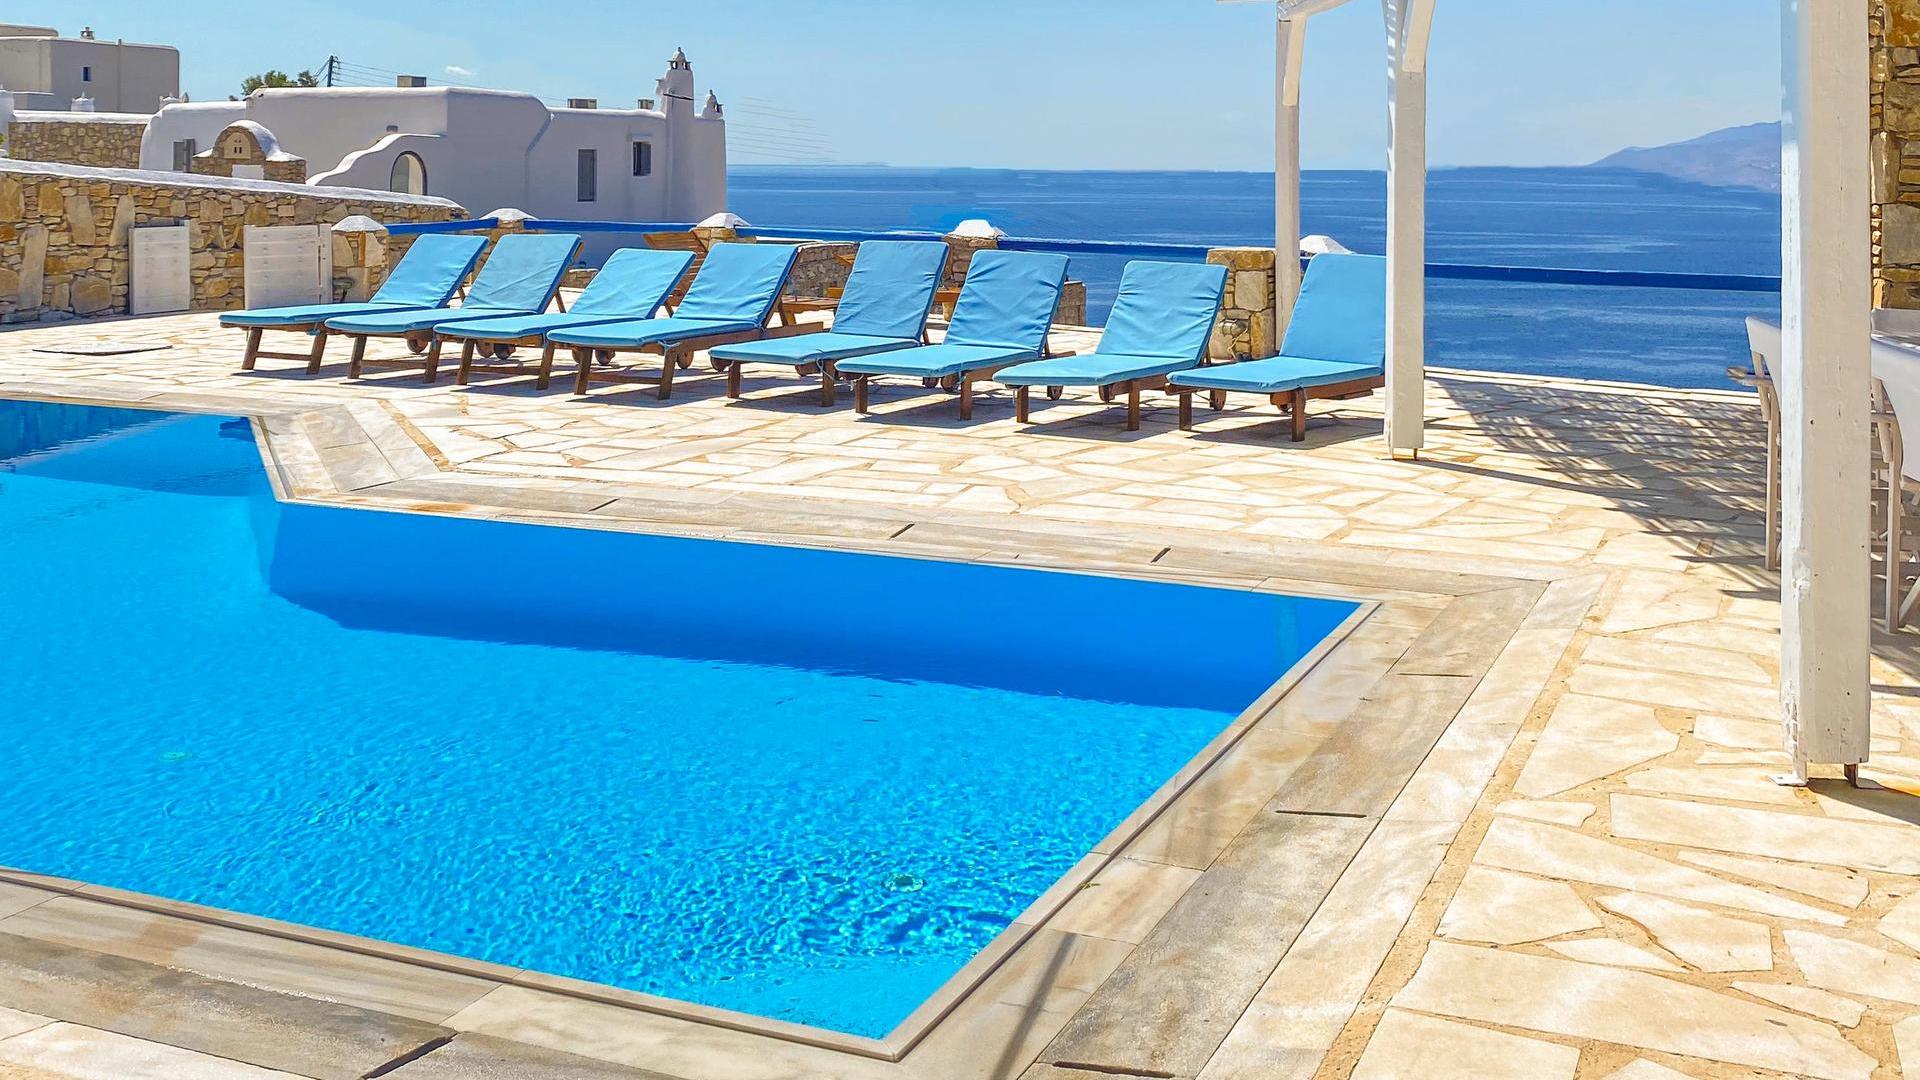 Blue Harmony Suites of Mykonos – Three Bedroom Apartment for 6 guests